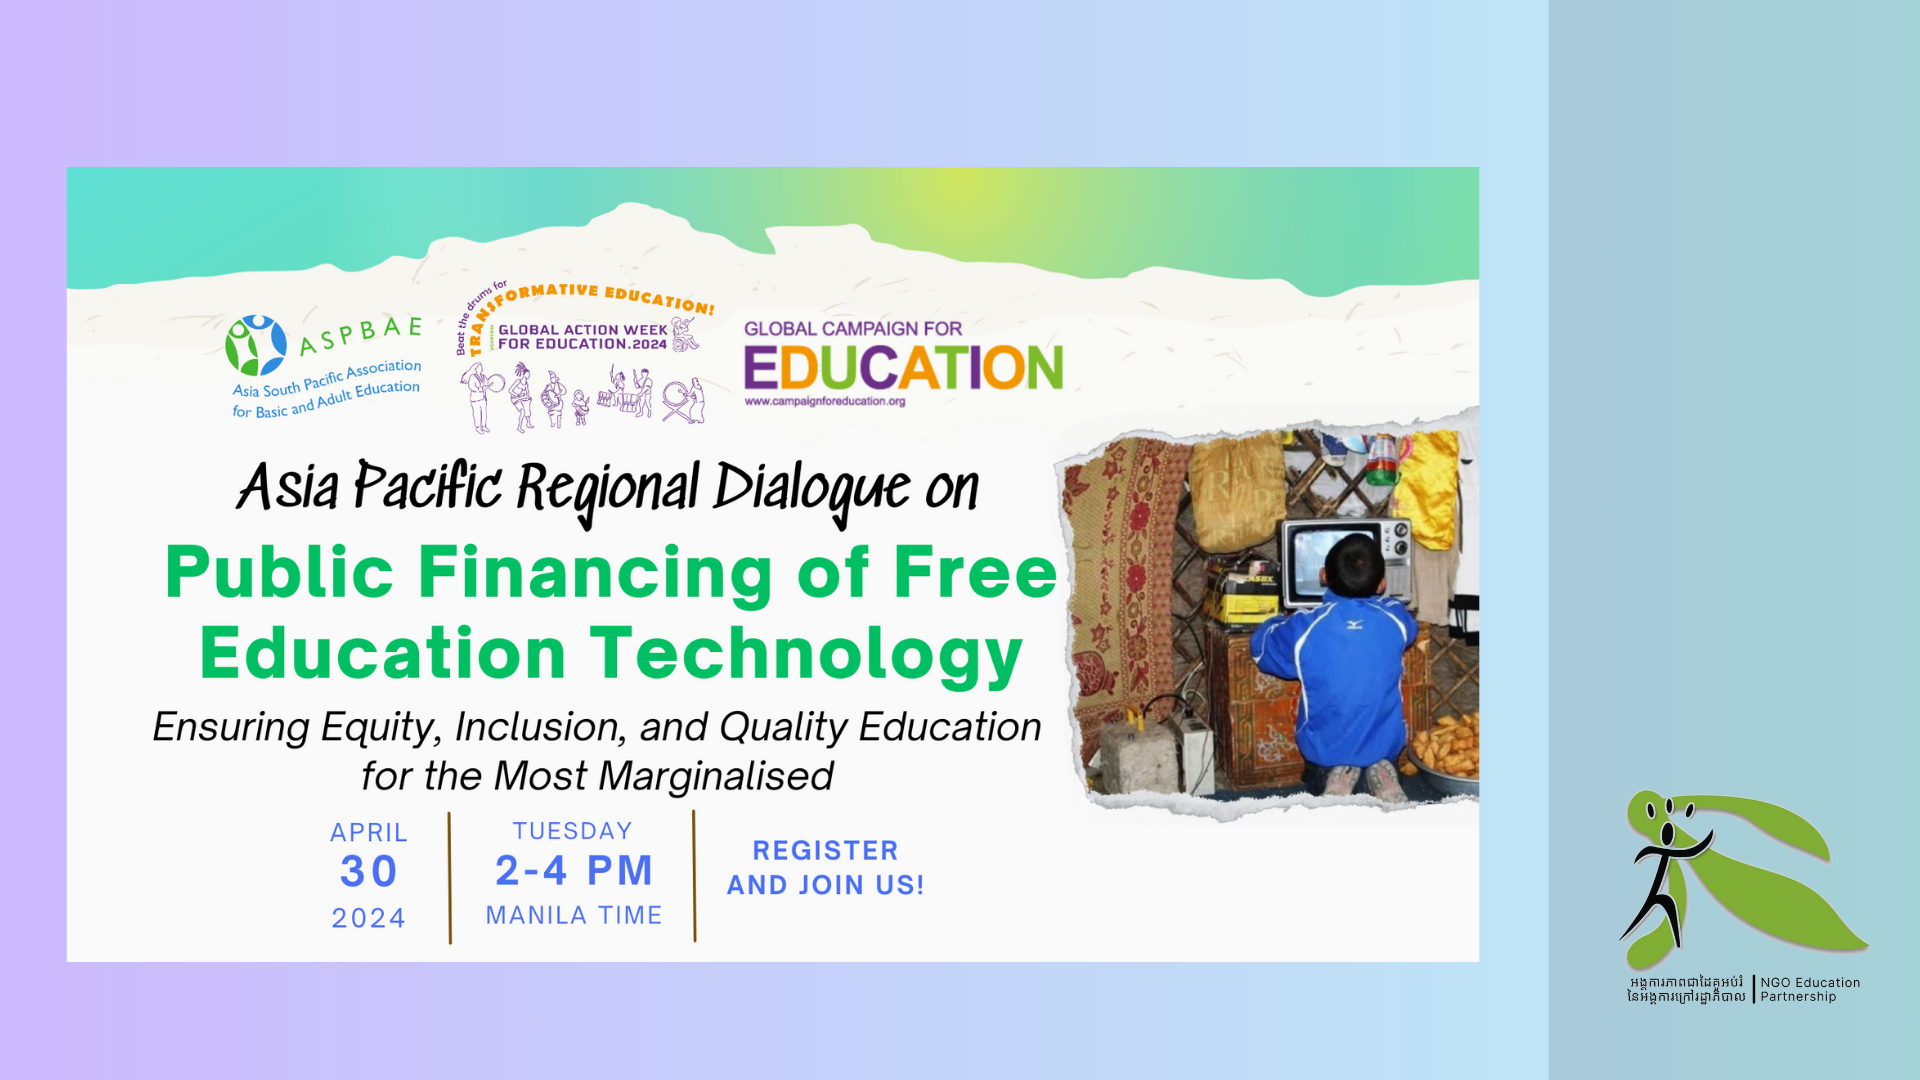 Join ASPBAE Asia Pacific Regional Dialogue on Public Financing of Free Education Technology: Ensuring Equity, Inclusion, and Quality Education for the Most Marginalised